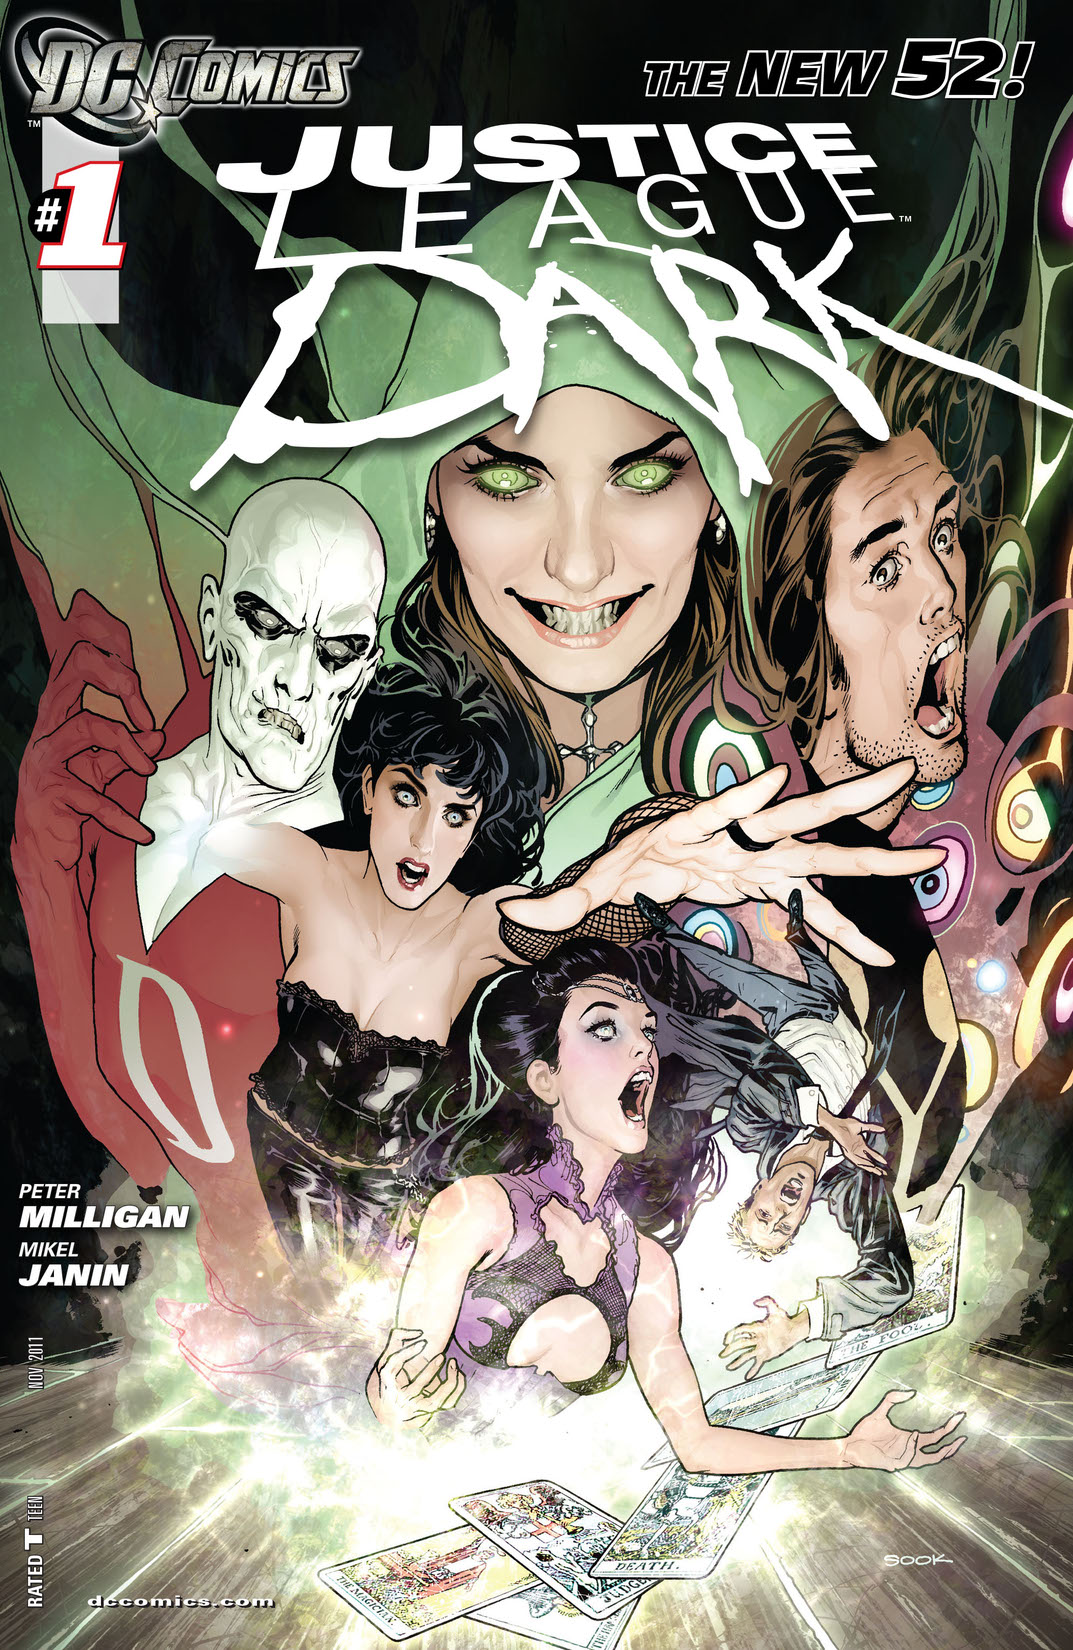 Justice League Dark (2011-) #1 preview images